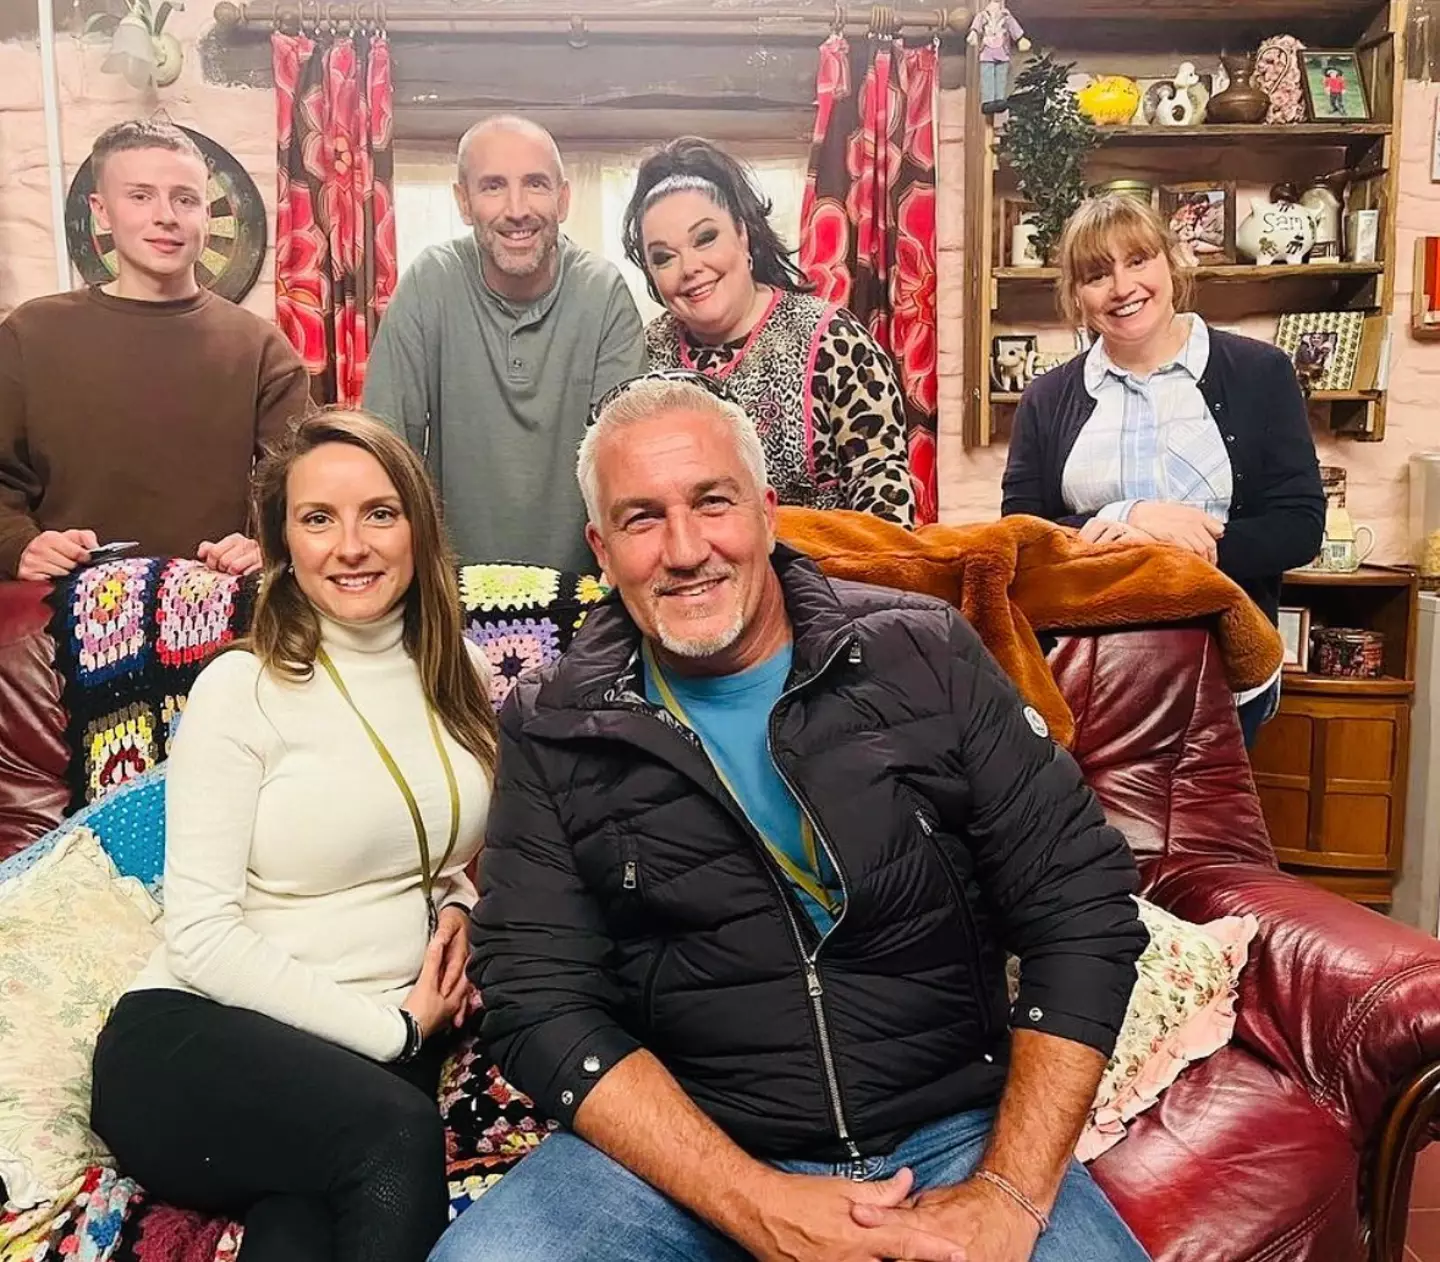 Paul Hollywood and his new wife Melissa visited the Emmerdale set.